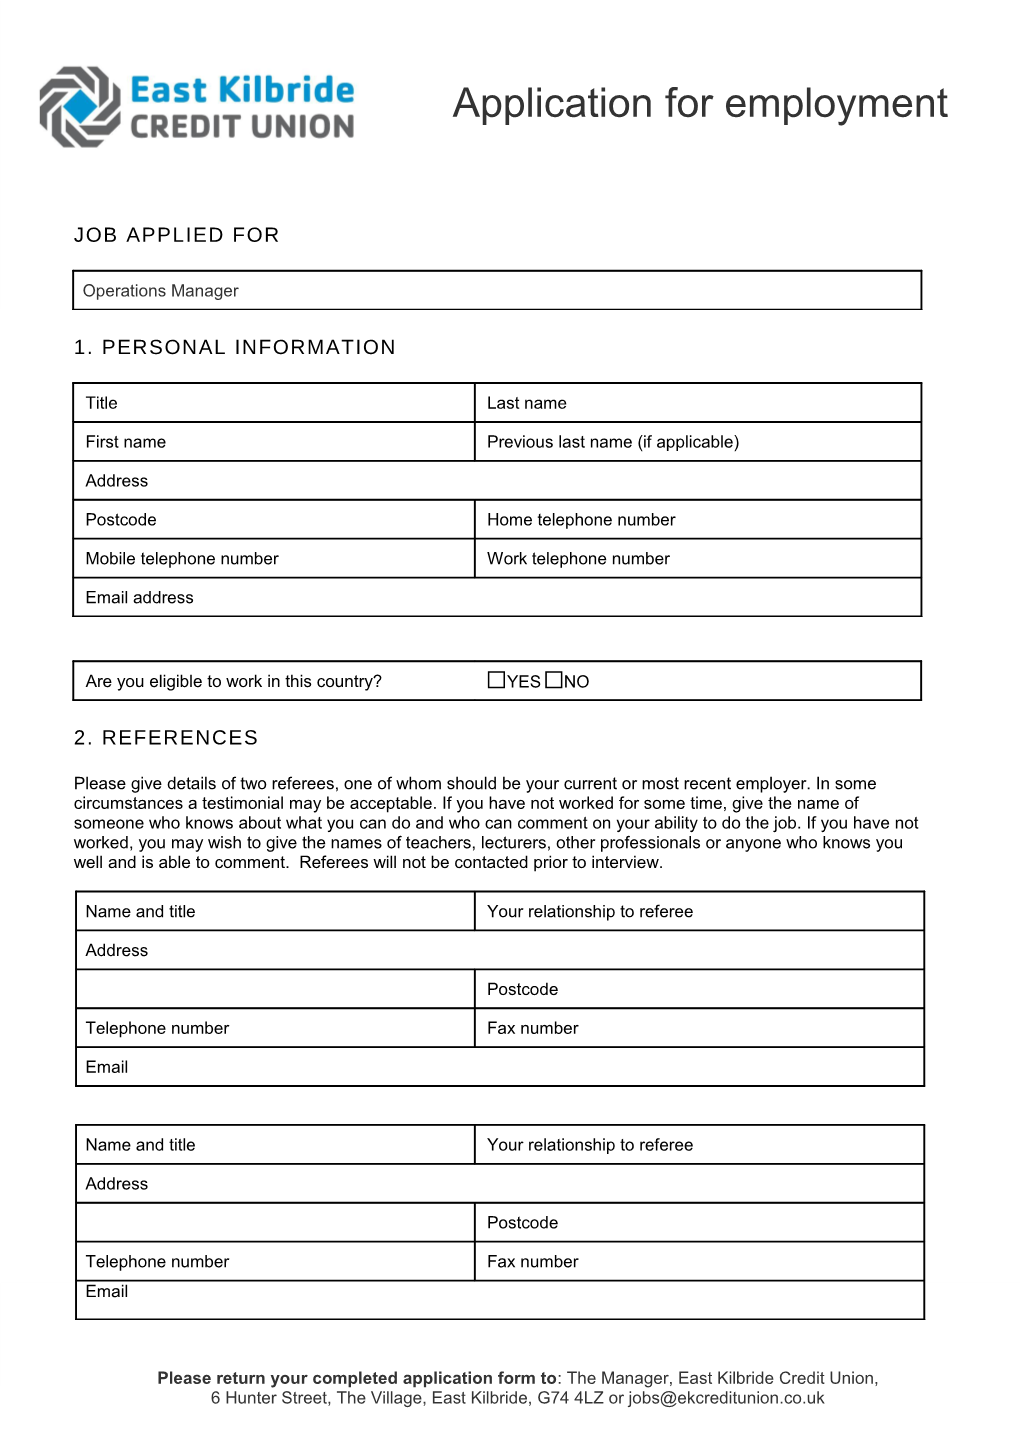 Job Applied For